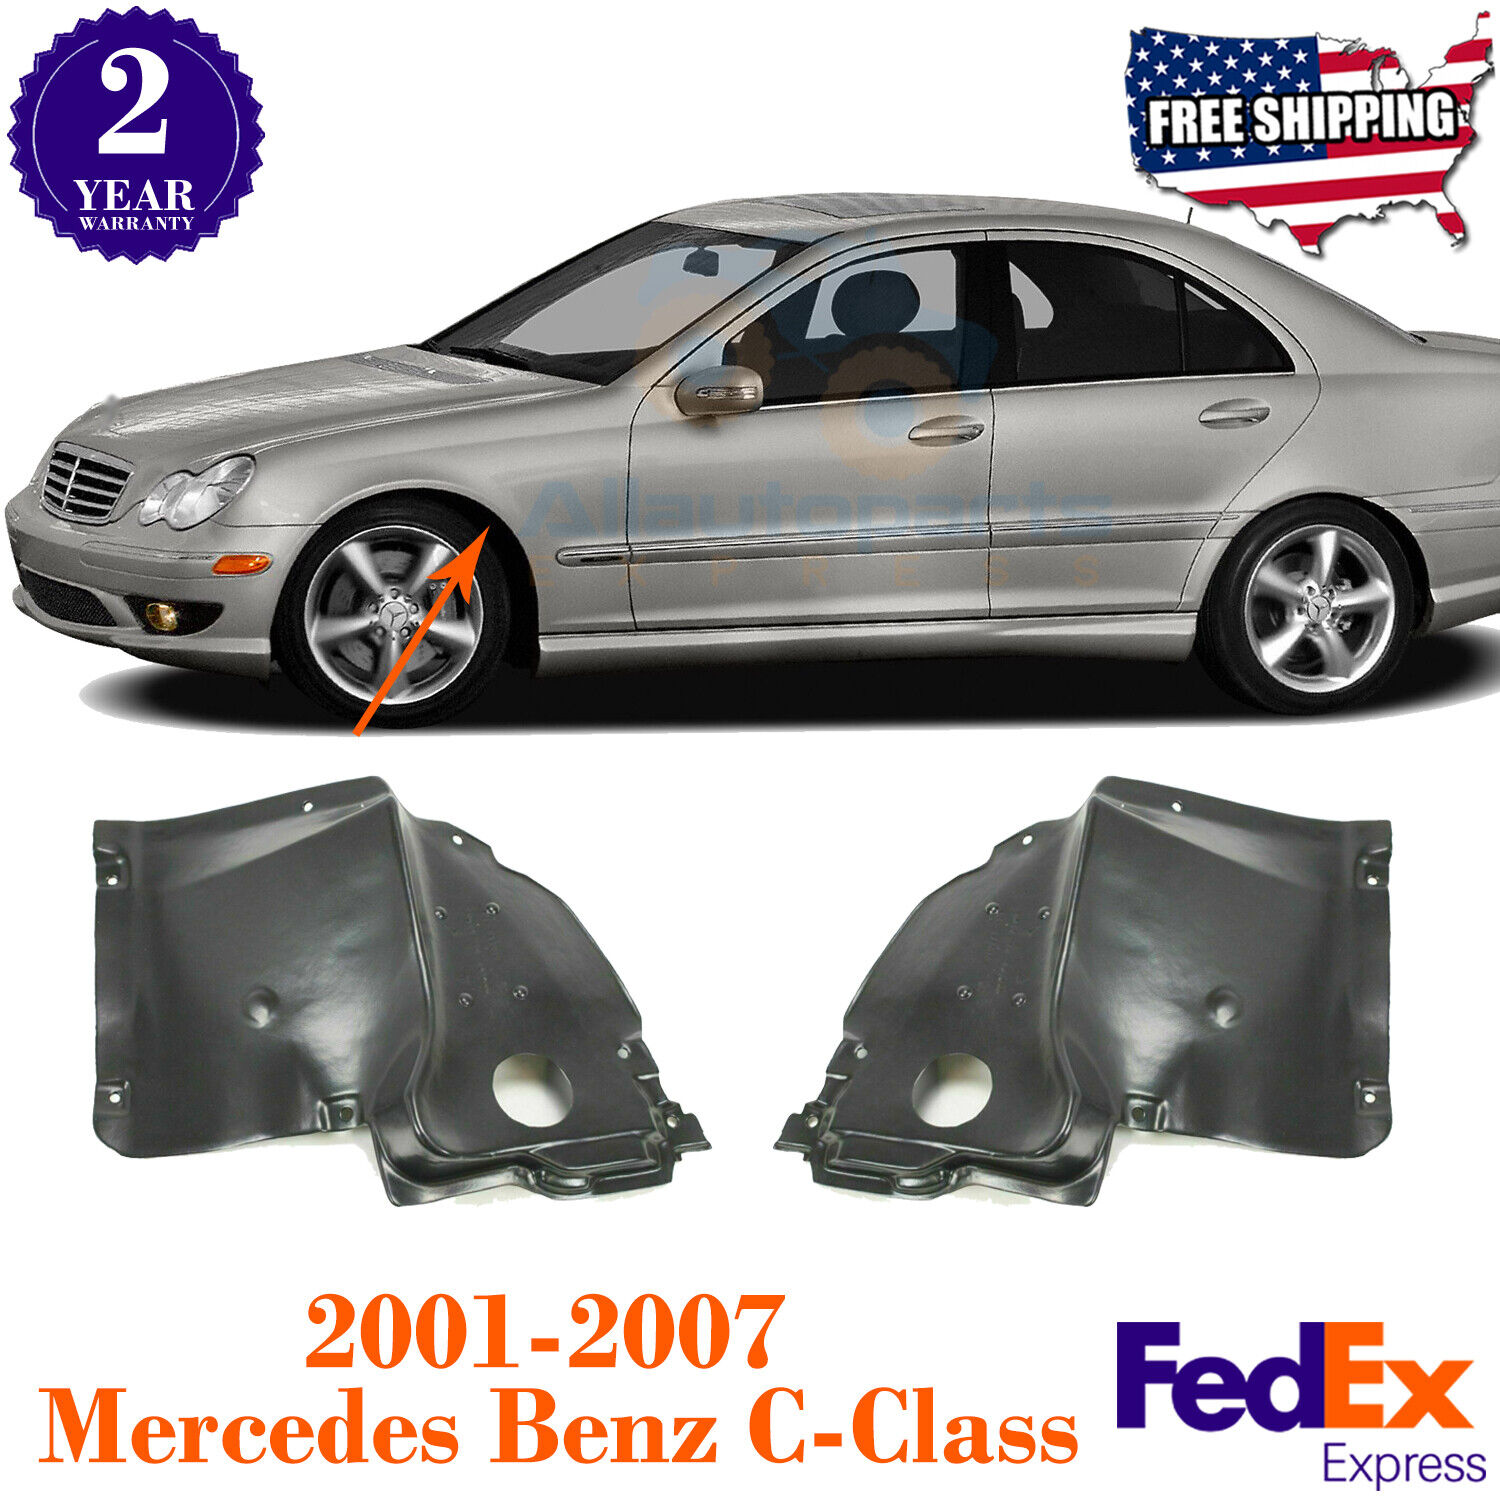 Fender Liners Front Lower Section For 2001 - 2007 Mercedes Benz C-Class